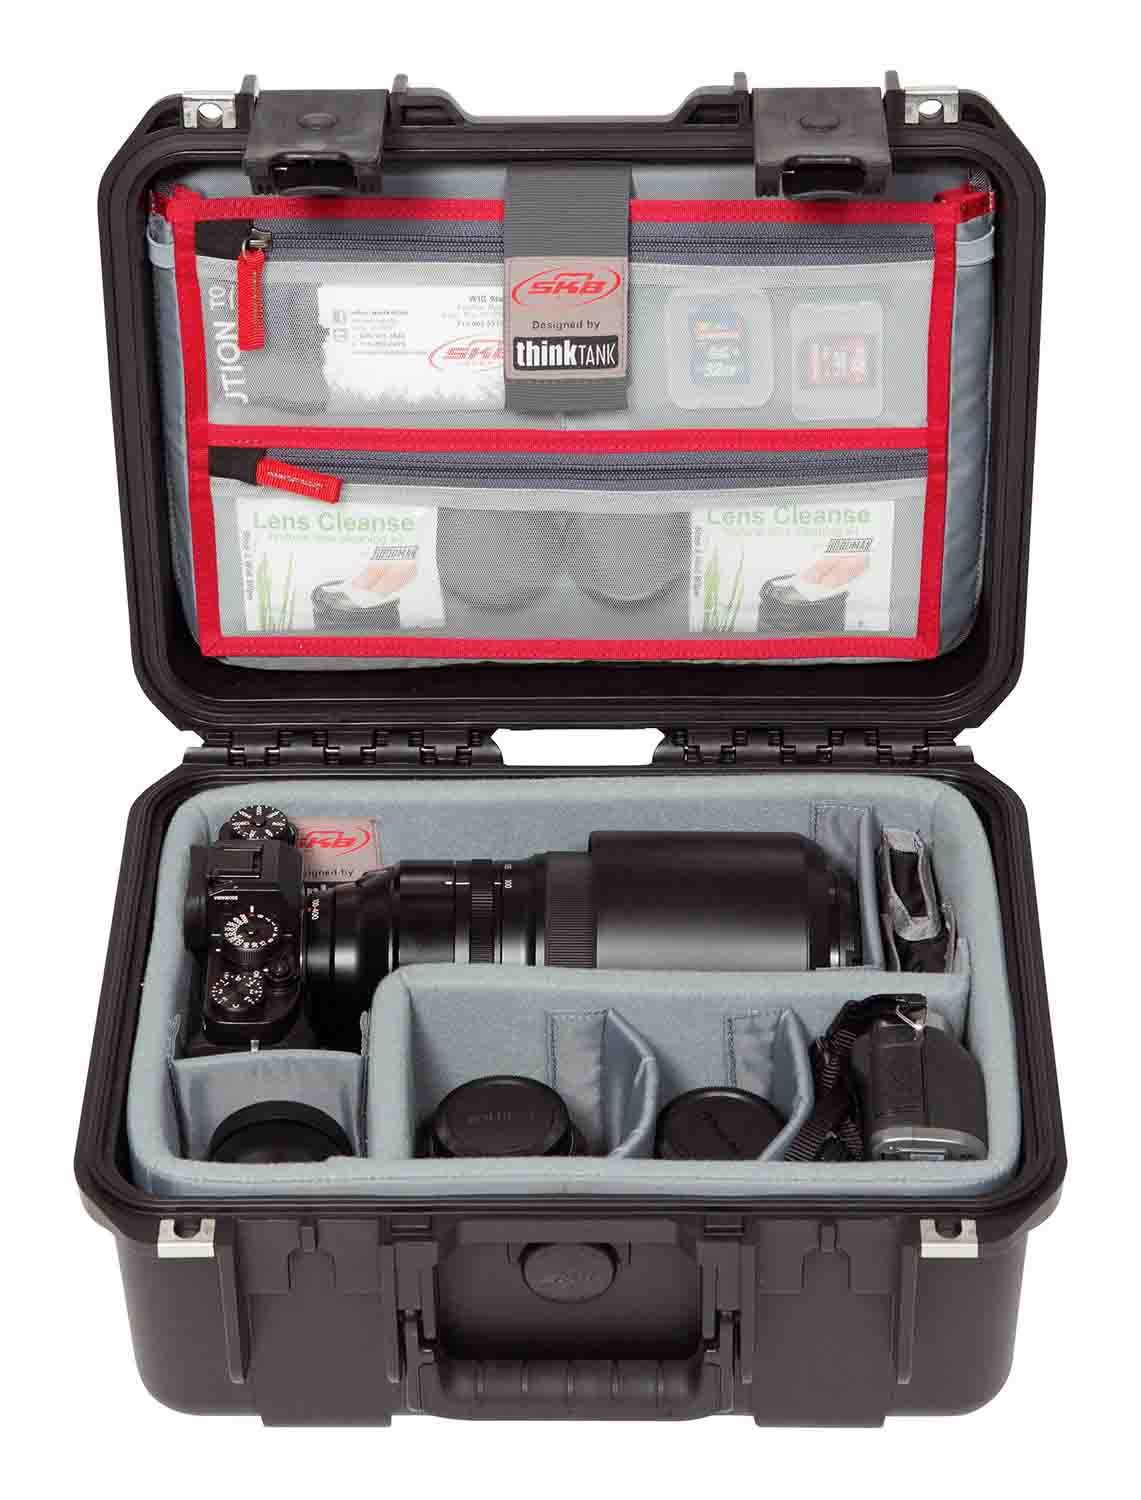 SKB Cases 3i-1309-6DL Case with Think Tank Photo Dividers and Lid Organizer - Black - Hollywood DJ